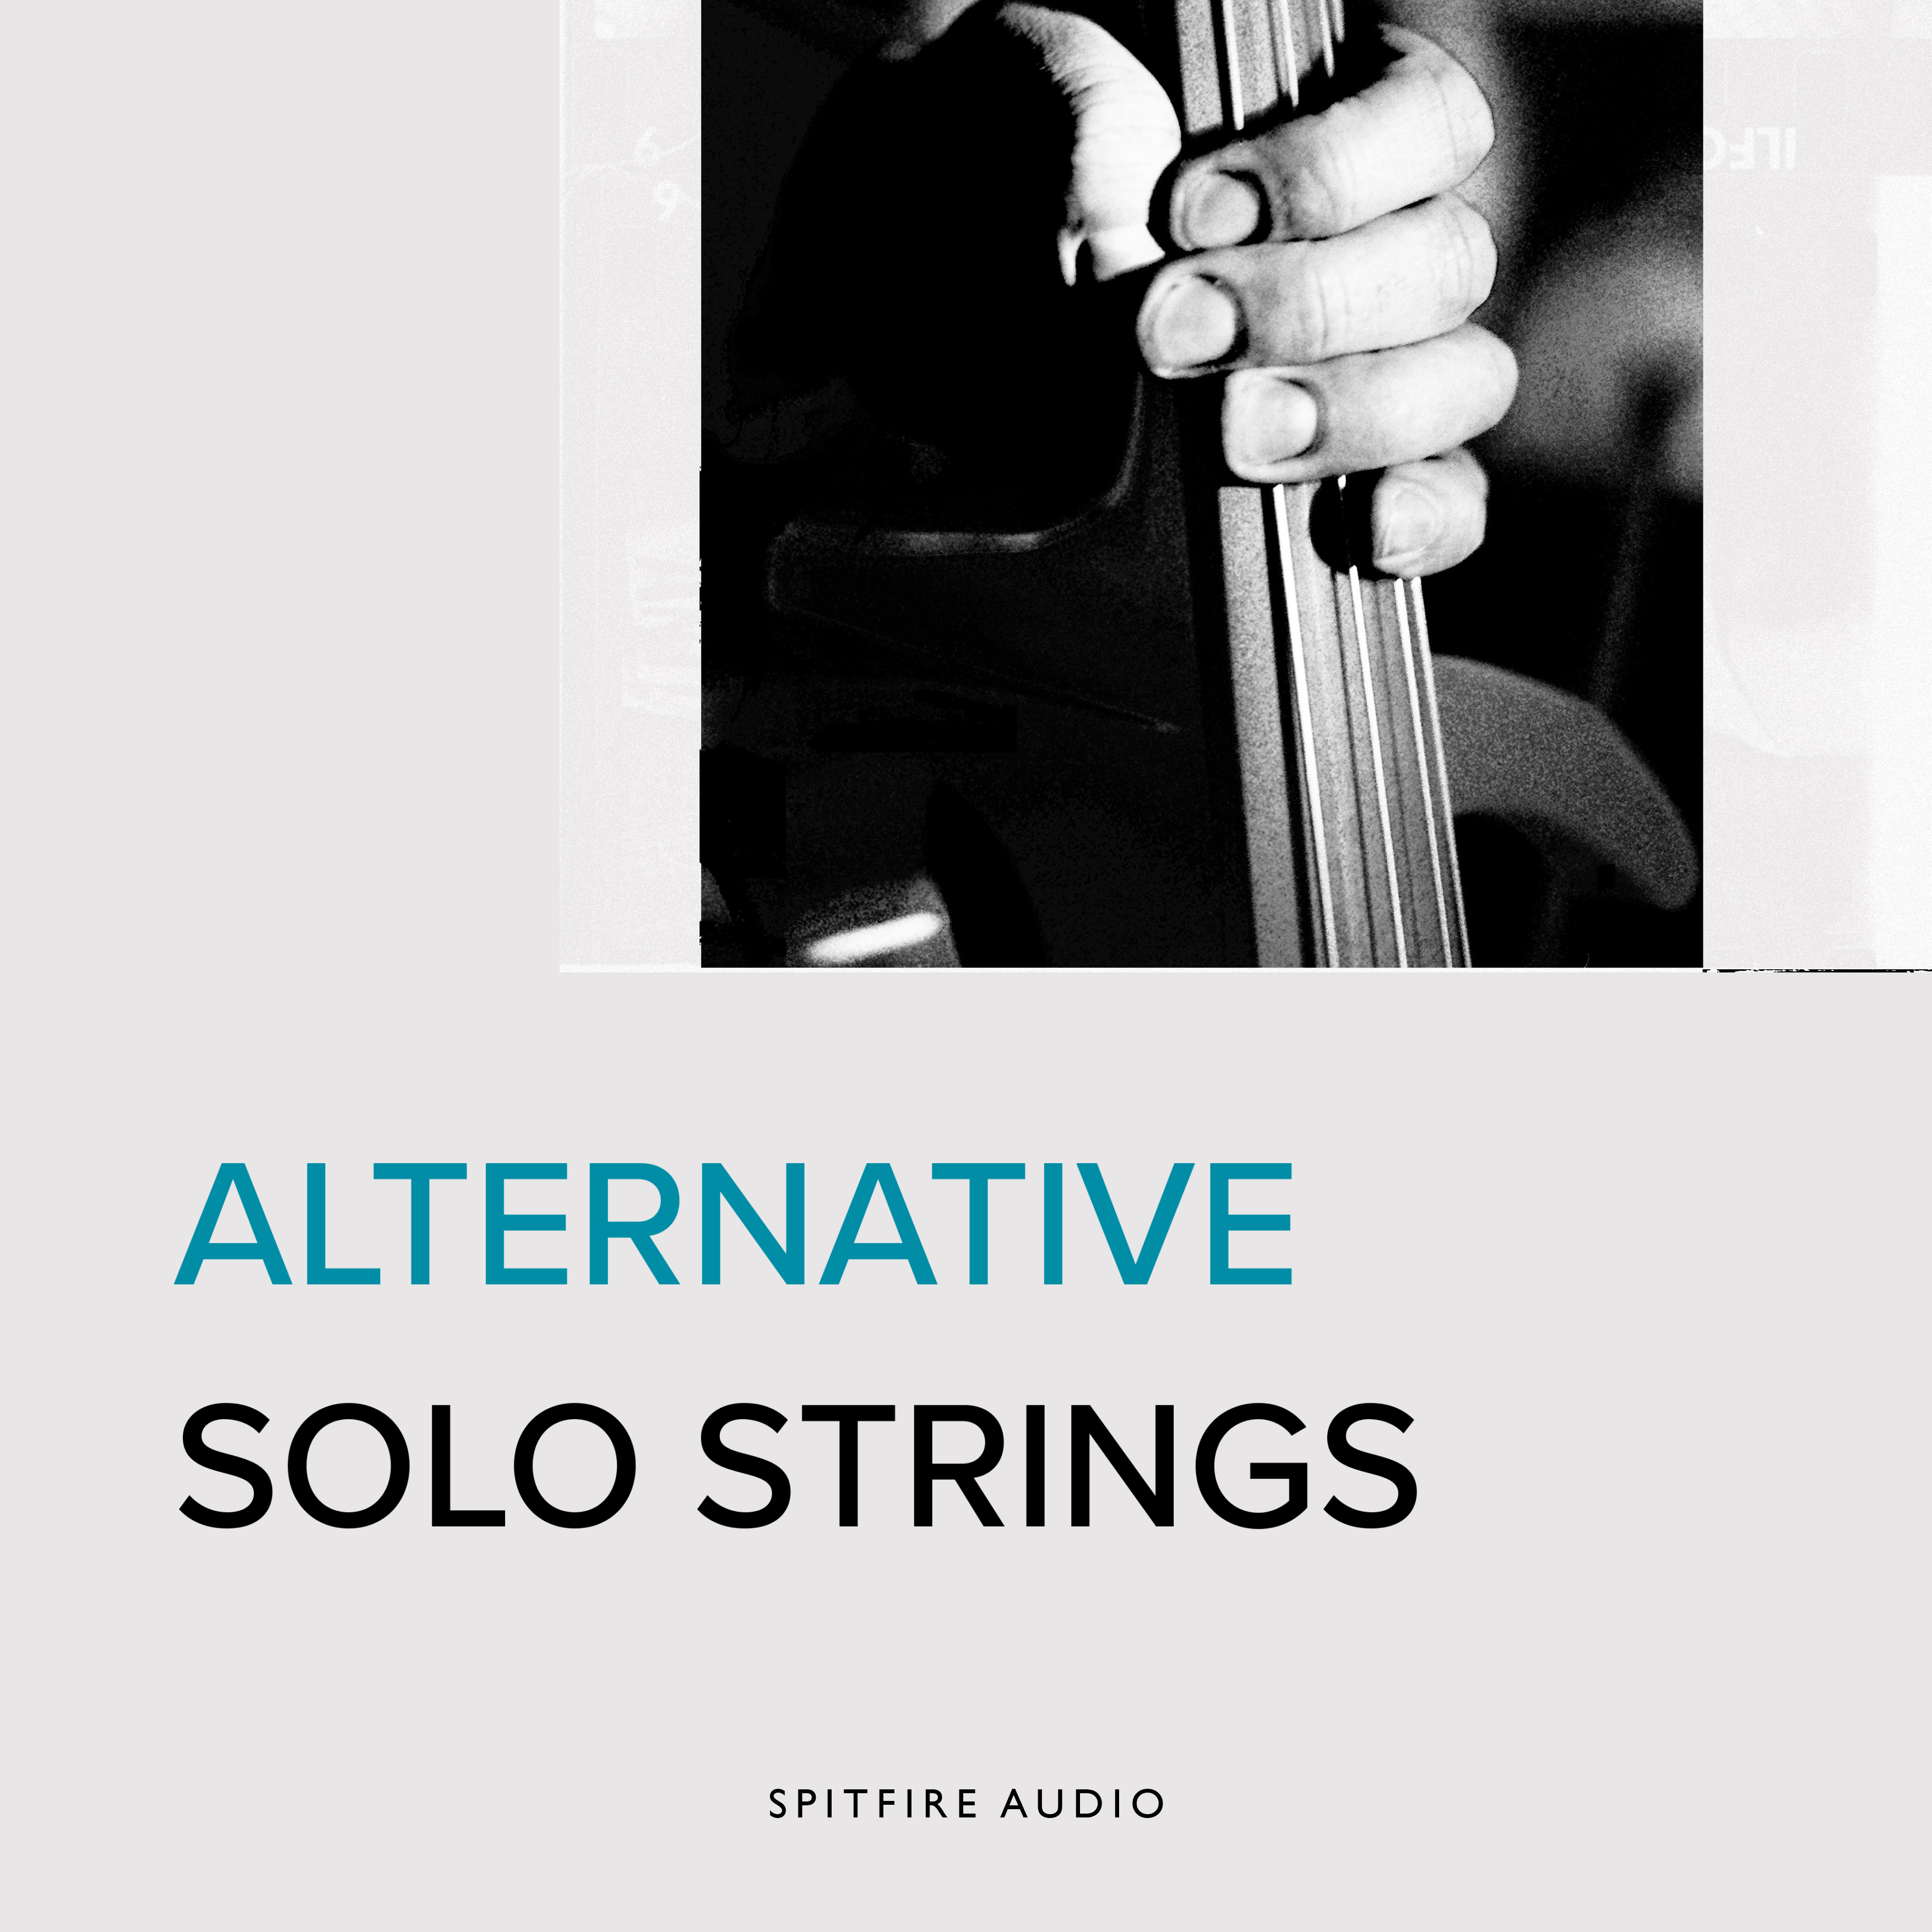 London Contemporary Orchestra Strings — Spitfire Audio